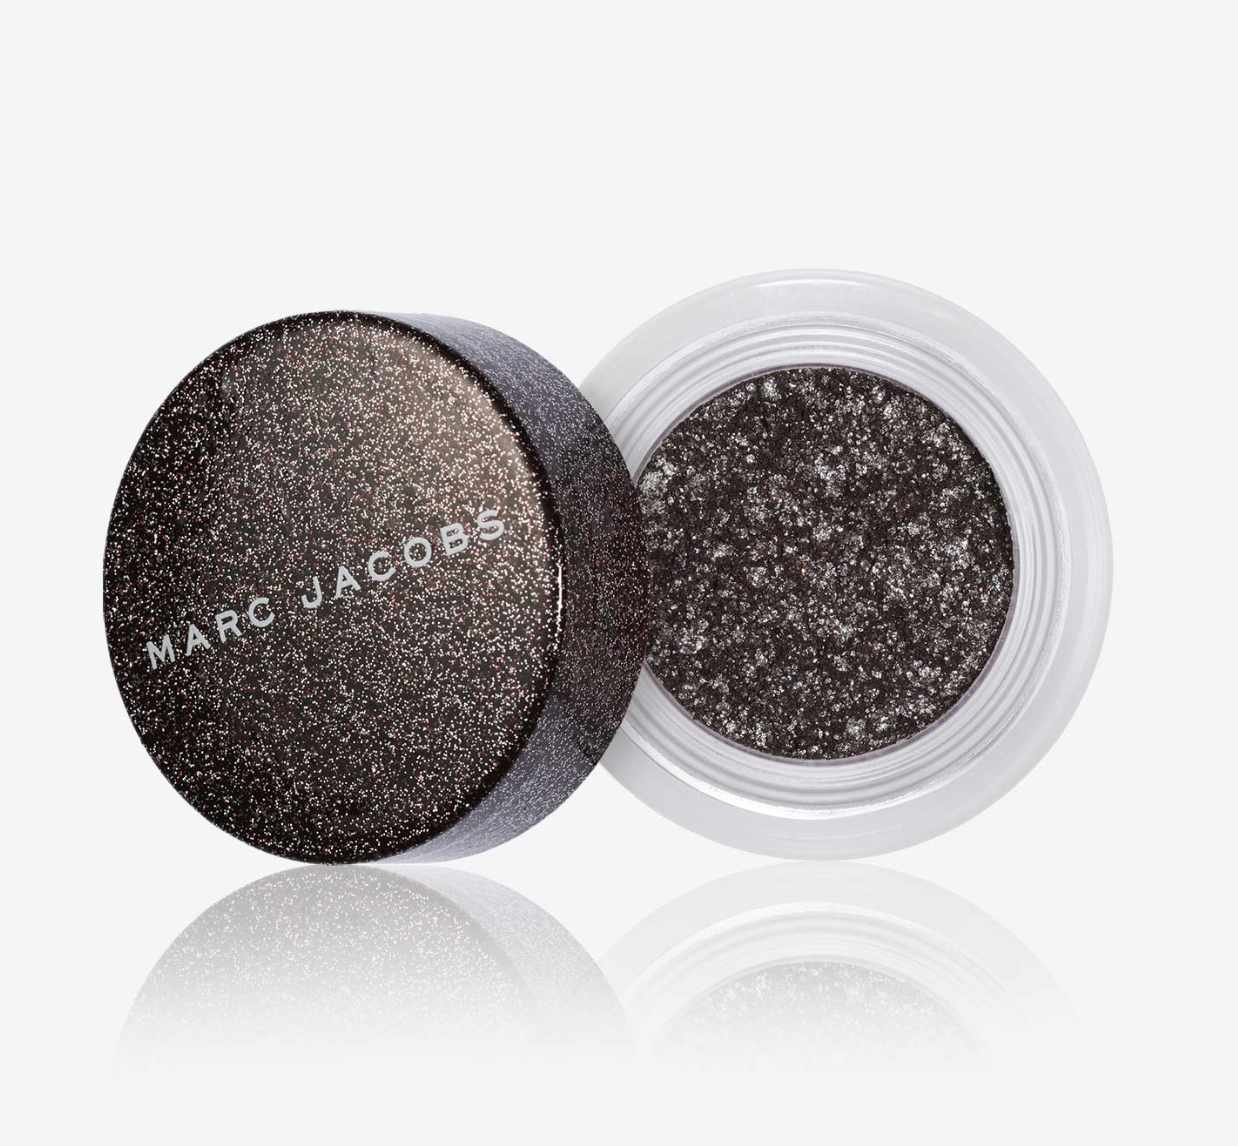 8 New Glitter Eye Shadows To Try Just In Time For New Year’s Eve